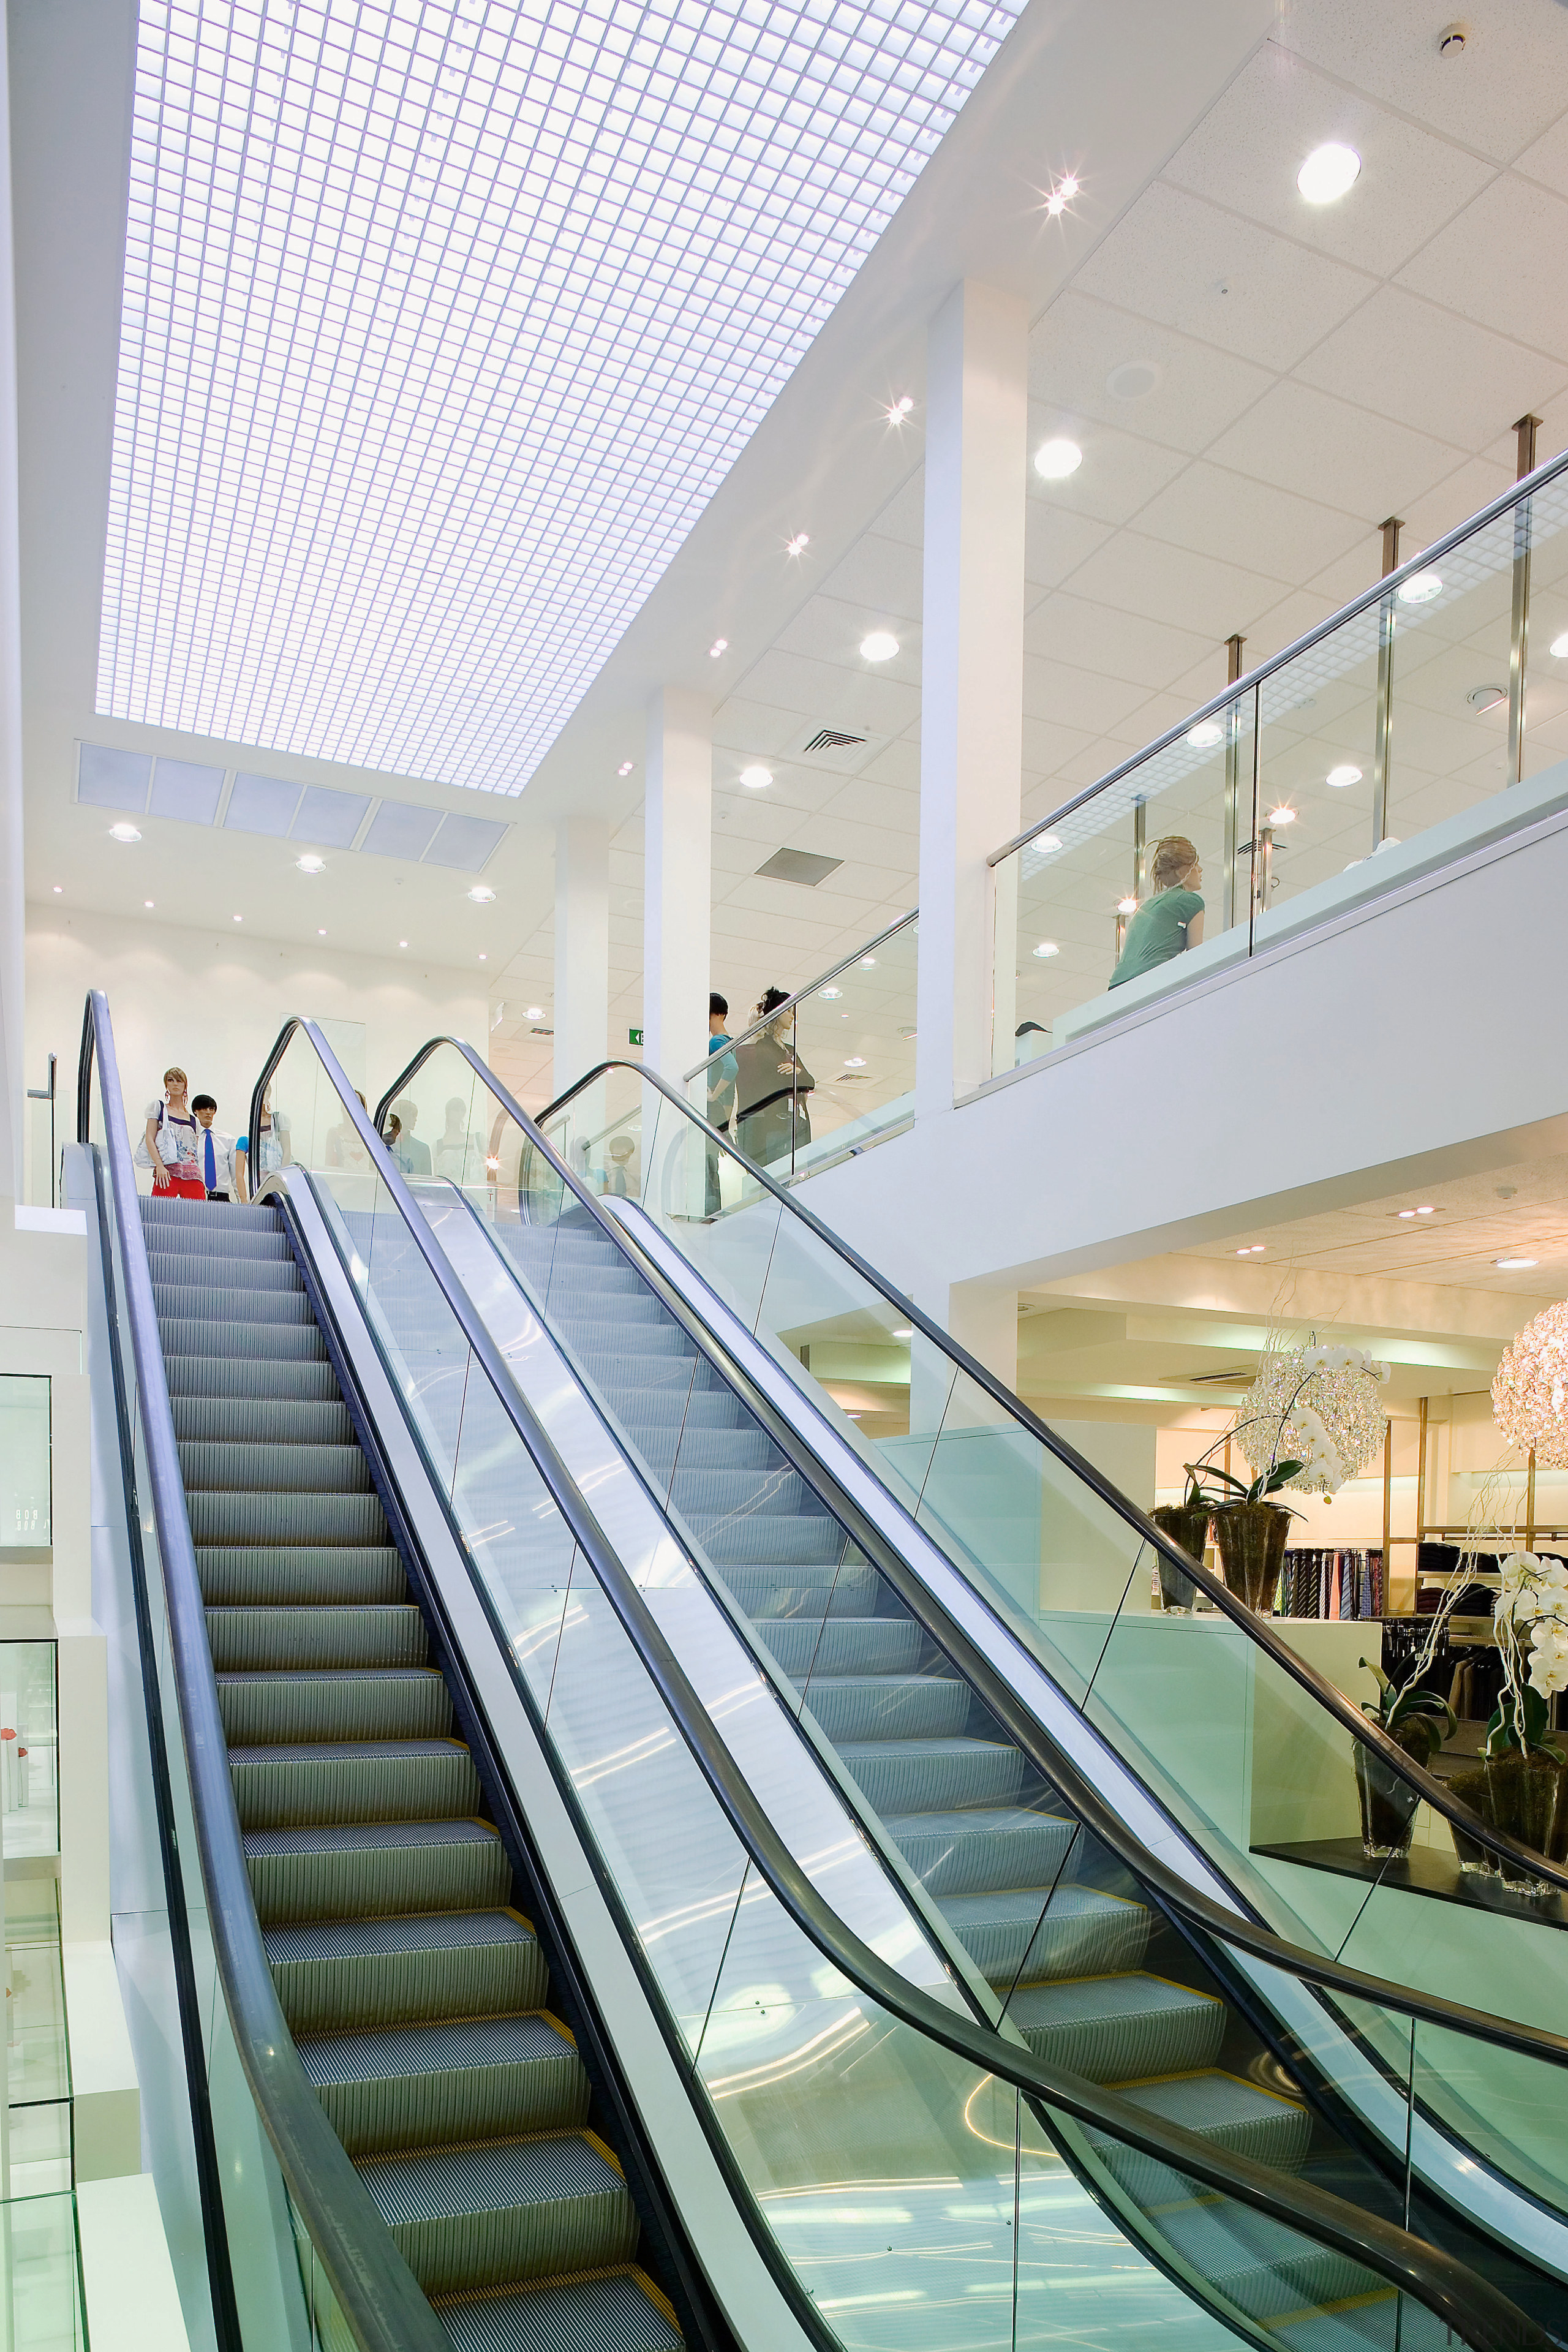 A view of some work by Amstar Construction. architecture, building, ceiling, daylighting, escalator, glass, handrail, interior design, leisure centre, lobby, shopping mall, stairs, structure, white, gray